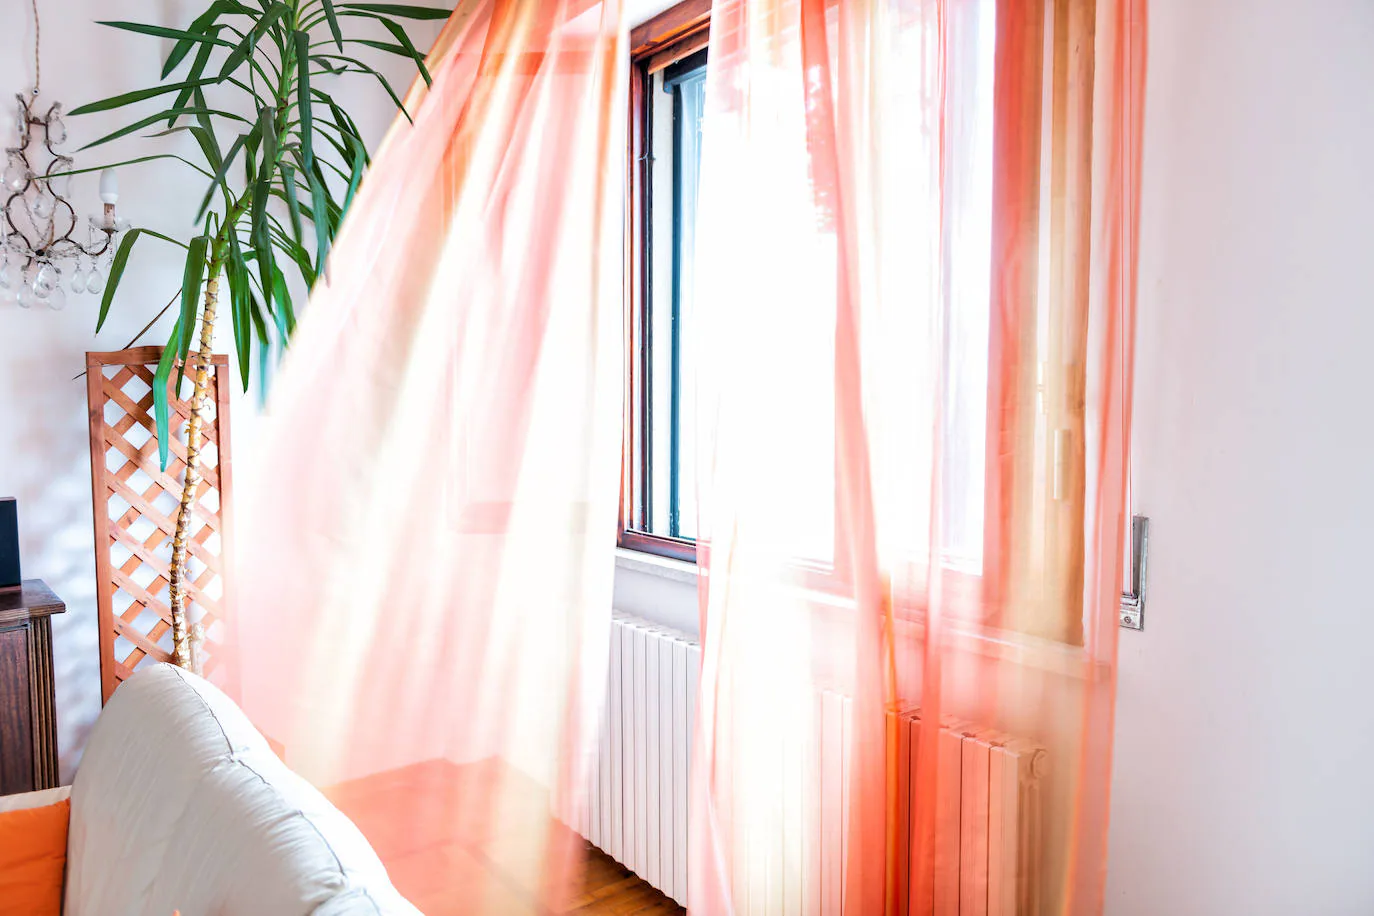 These are the alternatives to hang the curtains at home without drilling holes.